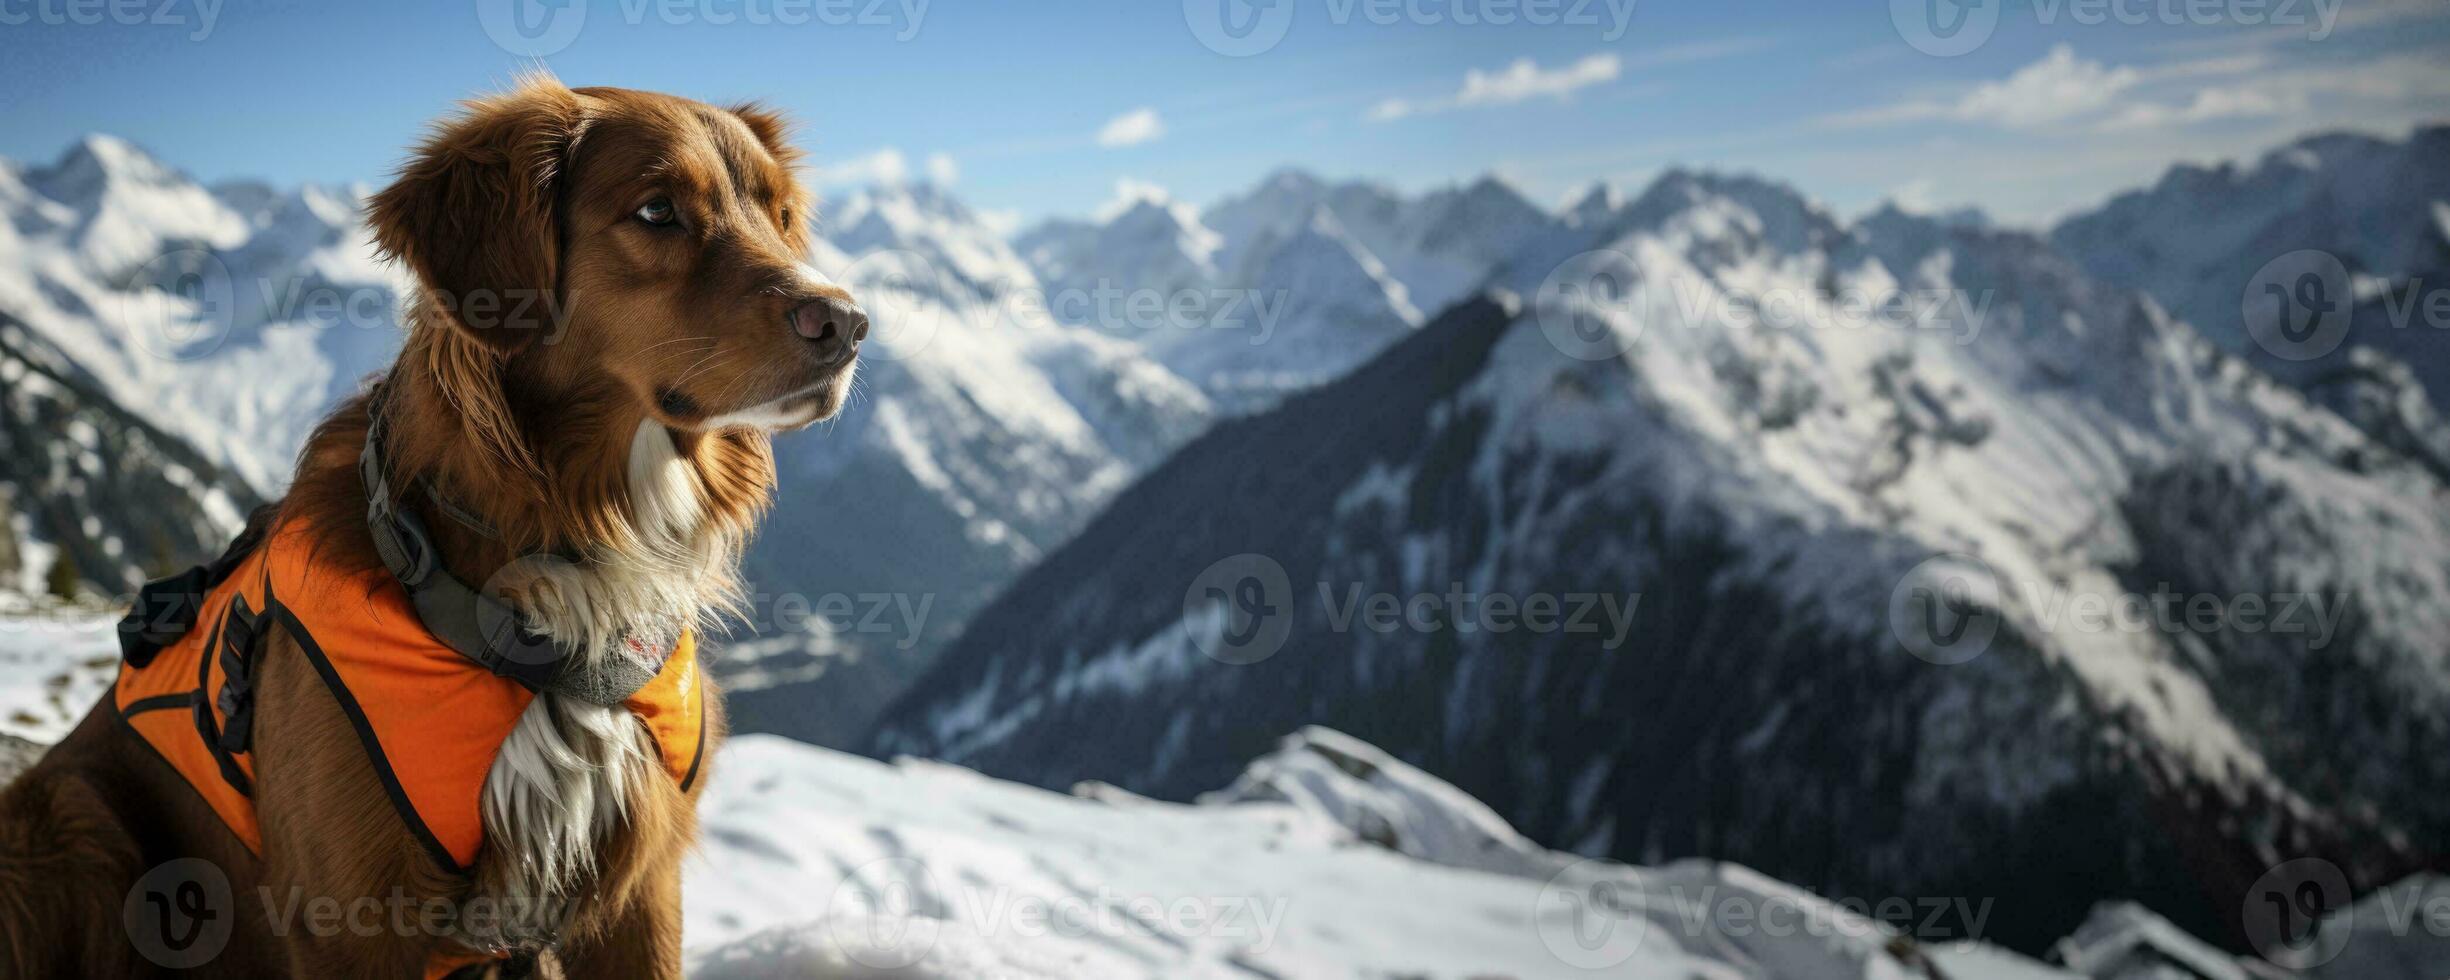 Search and rescue dog diligently tracking lost hiker in snowy Alps photo